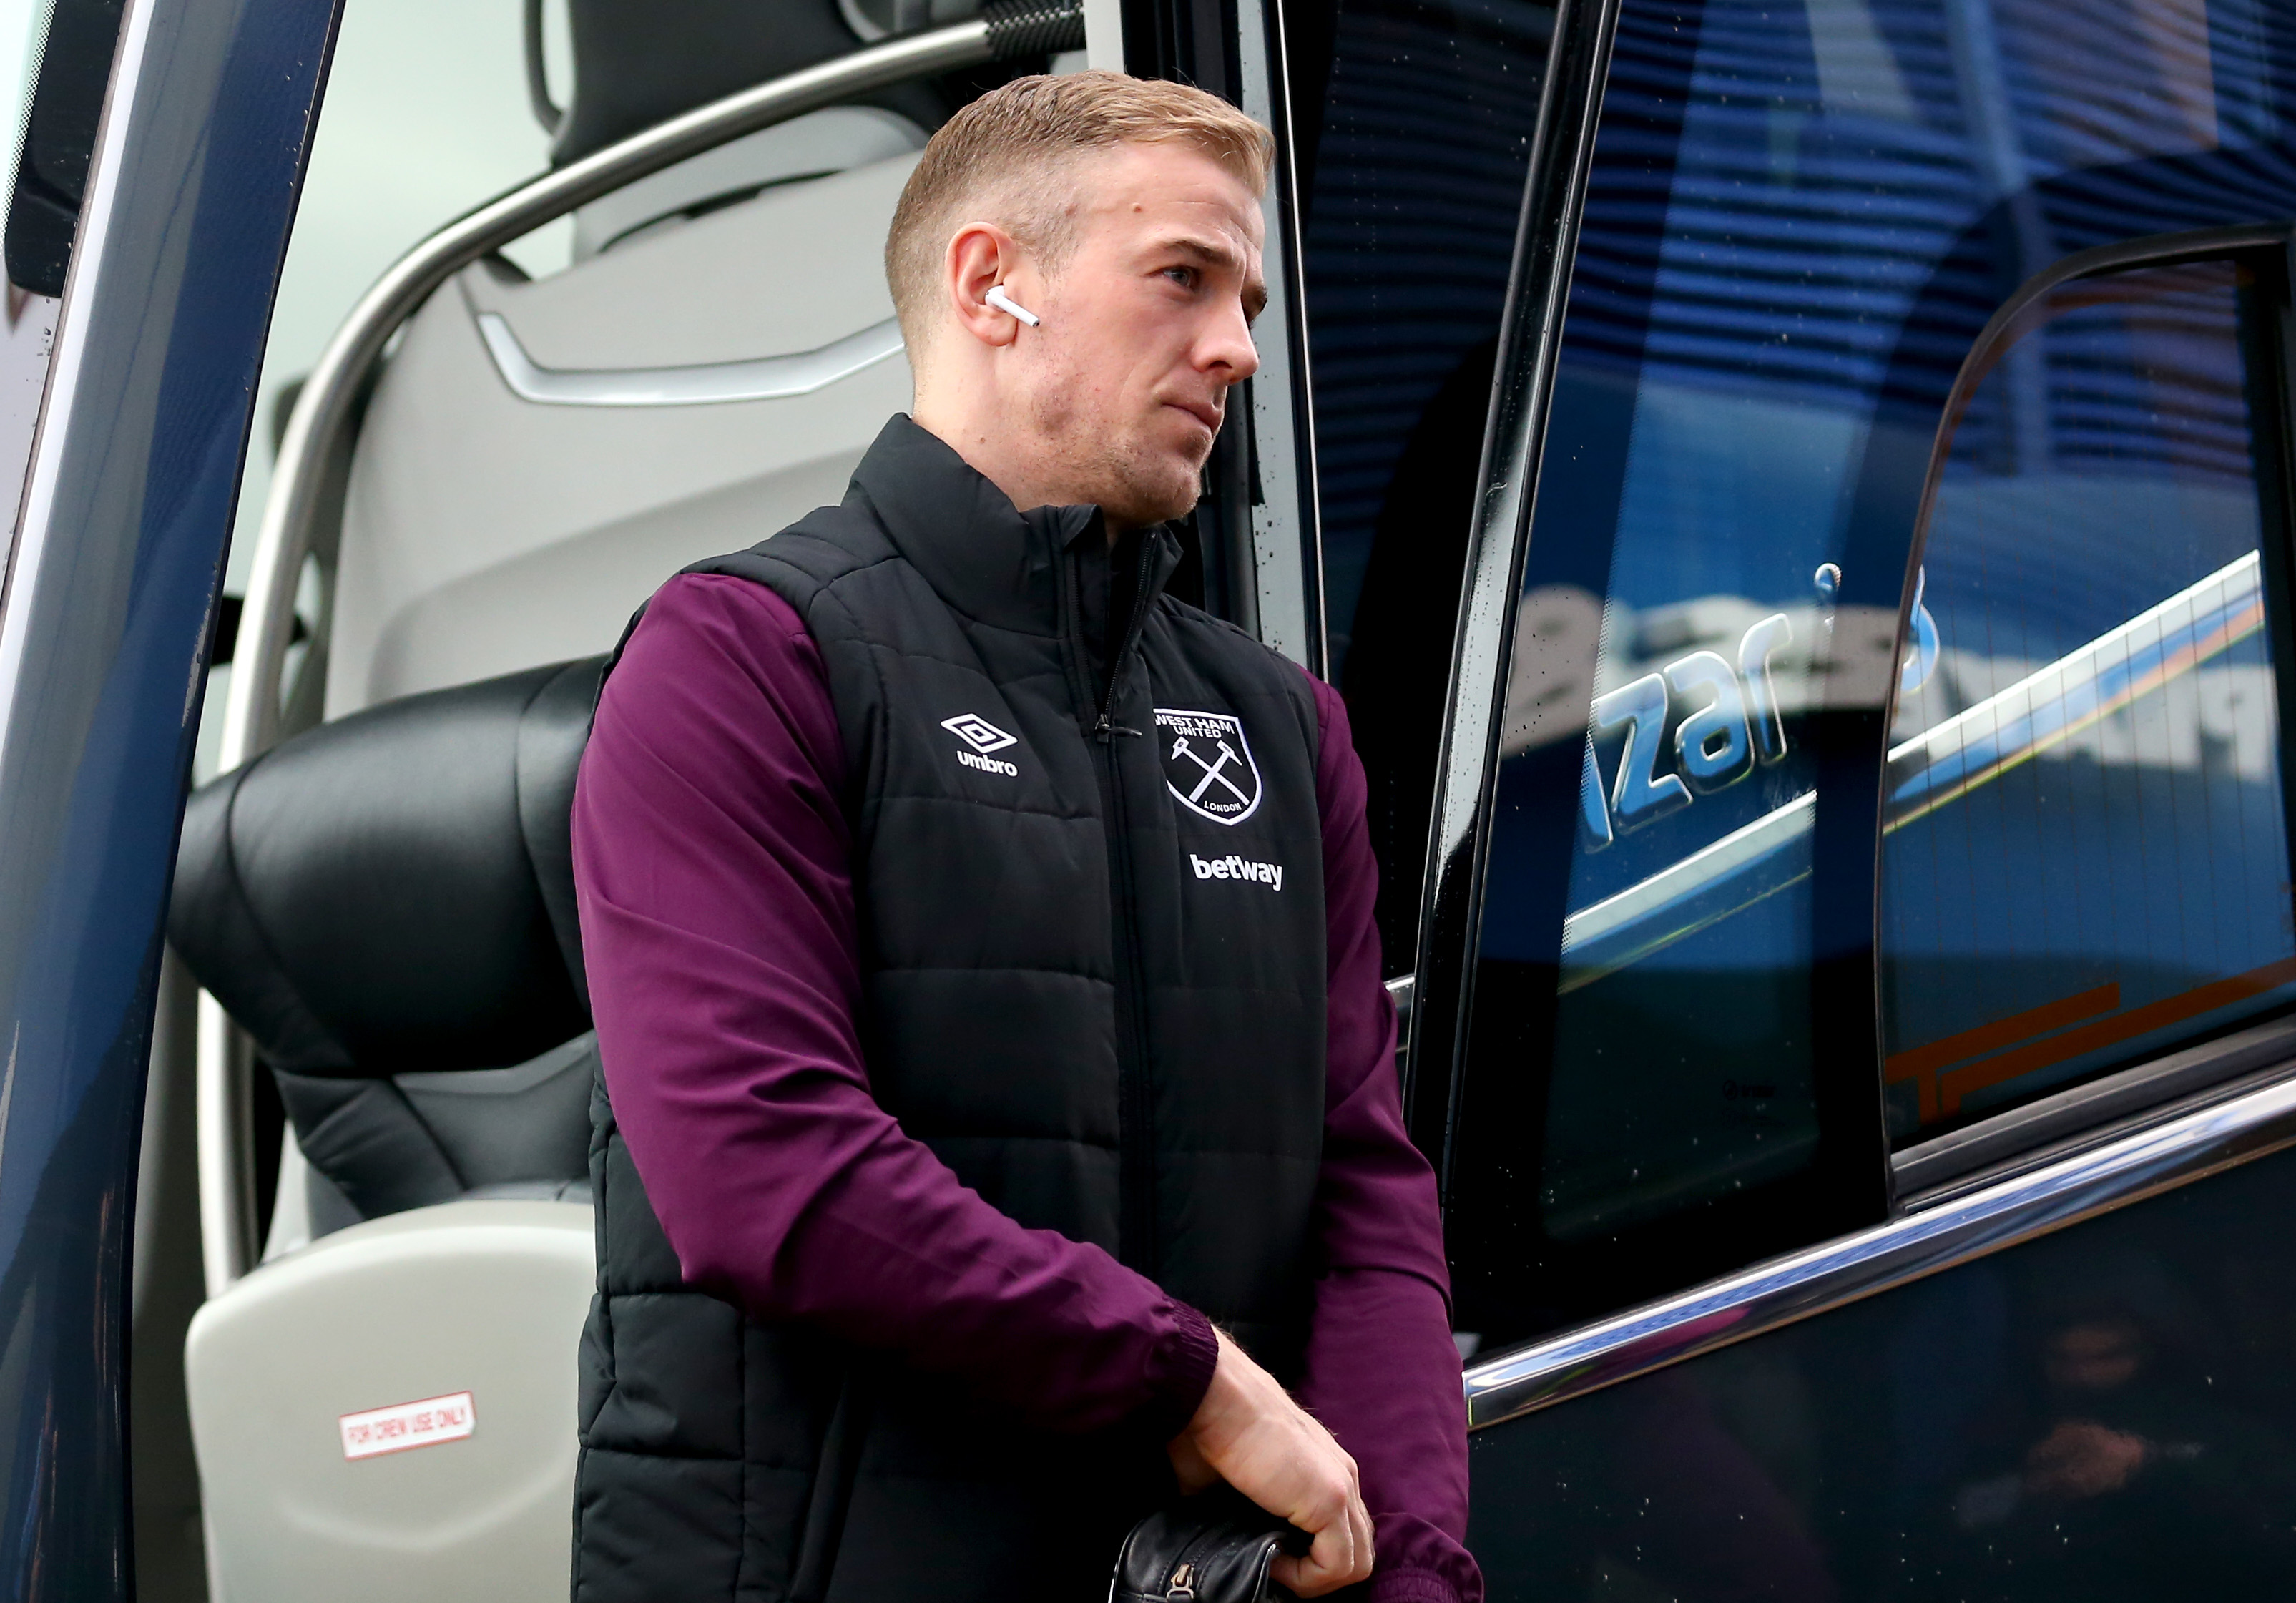 WIGAN, ENGLAND - JANUARY 27:  Joe Hart of West Ham United arrives at the stadium prior to The Emirates FA Cup Fourth Round match between Wigan Athletic and West Ham United on January 27, 2018 in Wigan, United Kingdom.  (Photo by Jan Kruger/Getty Images)